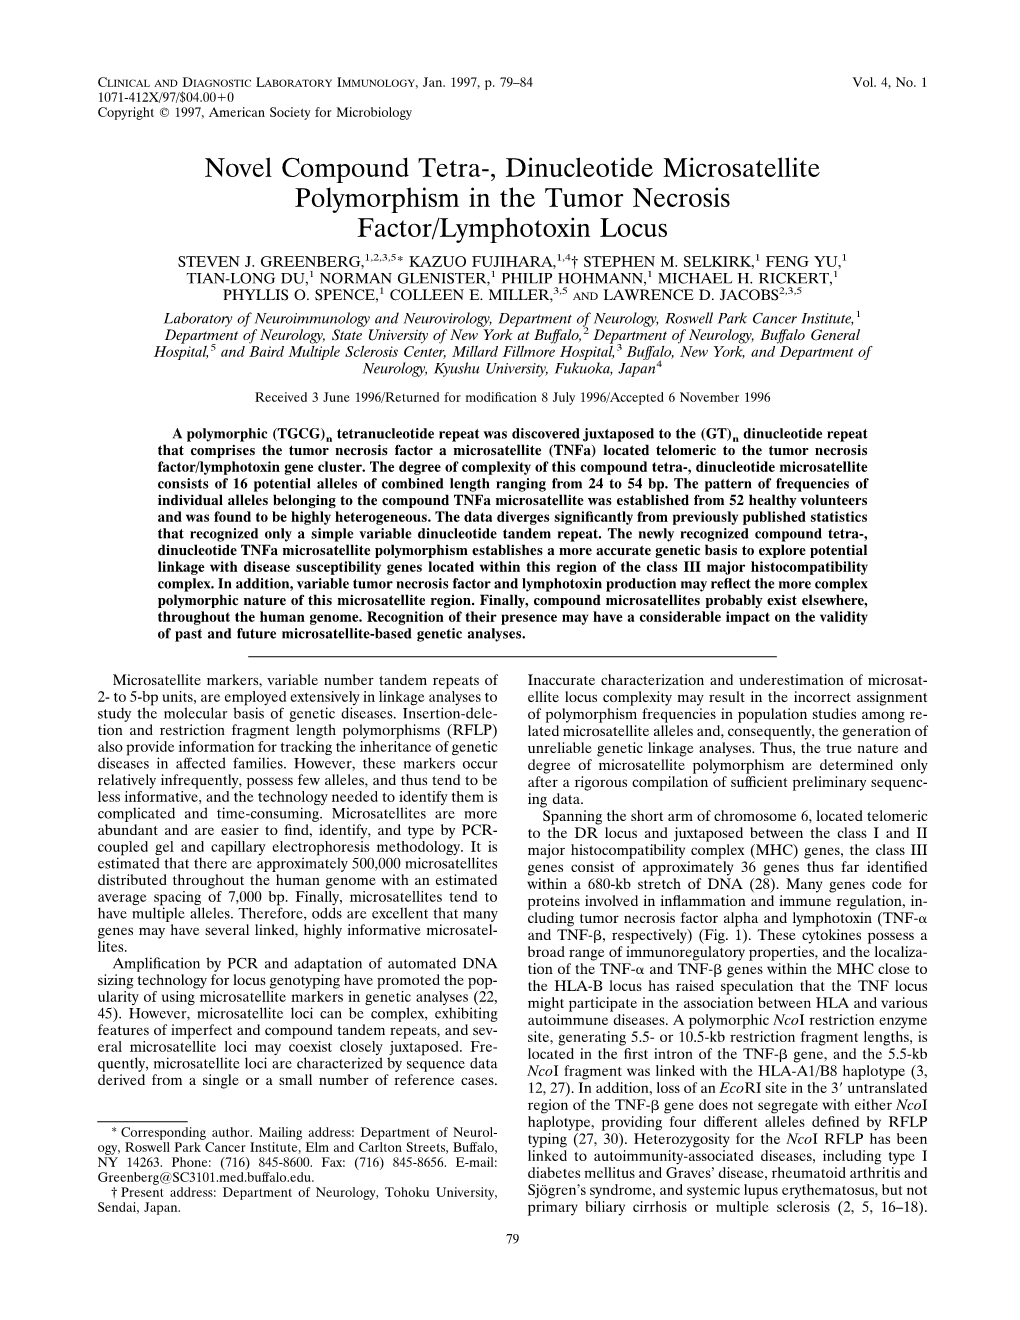 Novel Compound Tetra-, Dinucleotide Microsatellite Polymorphism in the Tumor Necrosis Factor/Lymphotoxin Locus STEVEN J